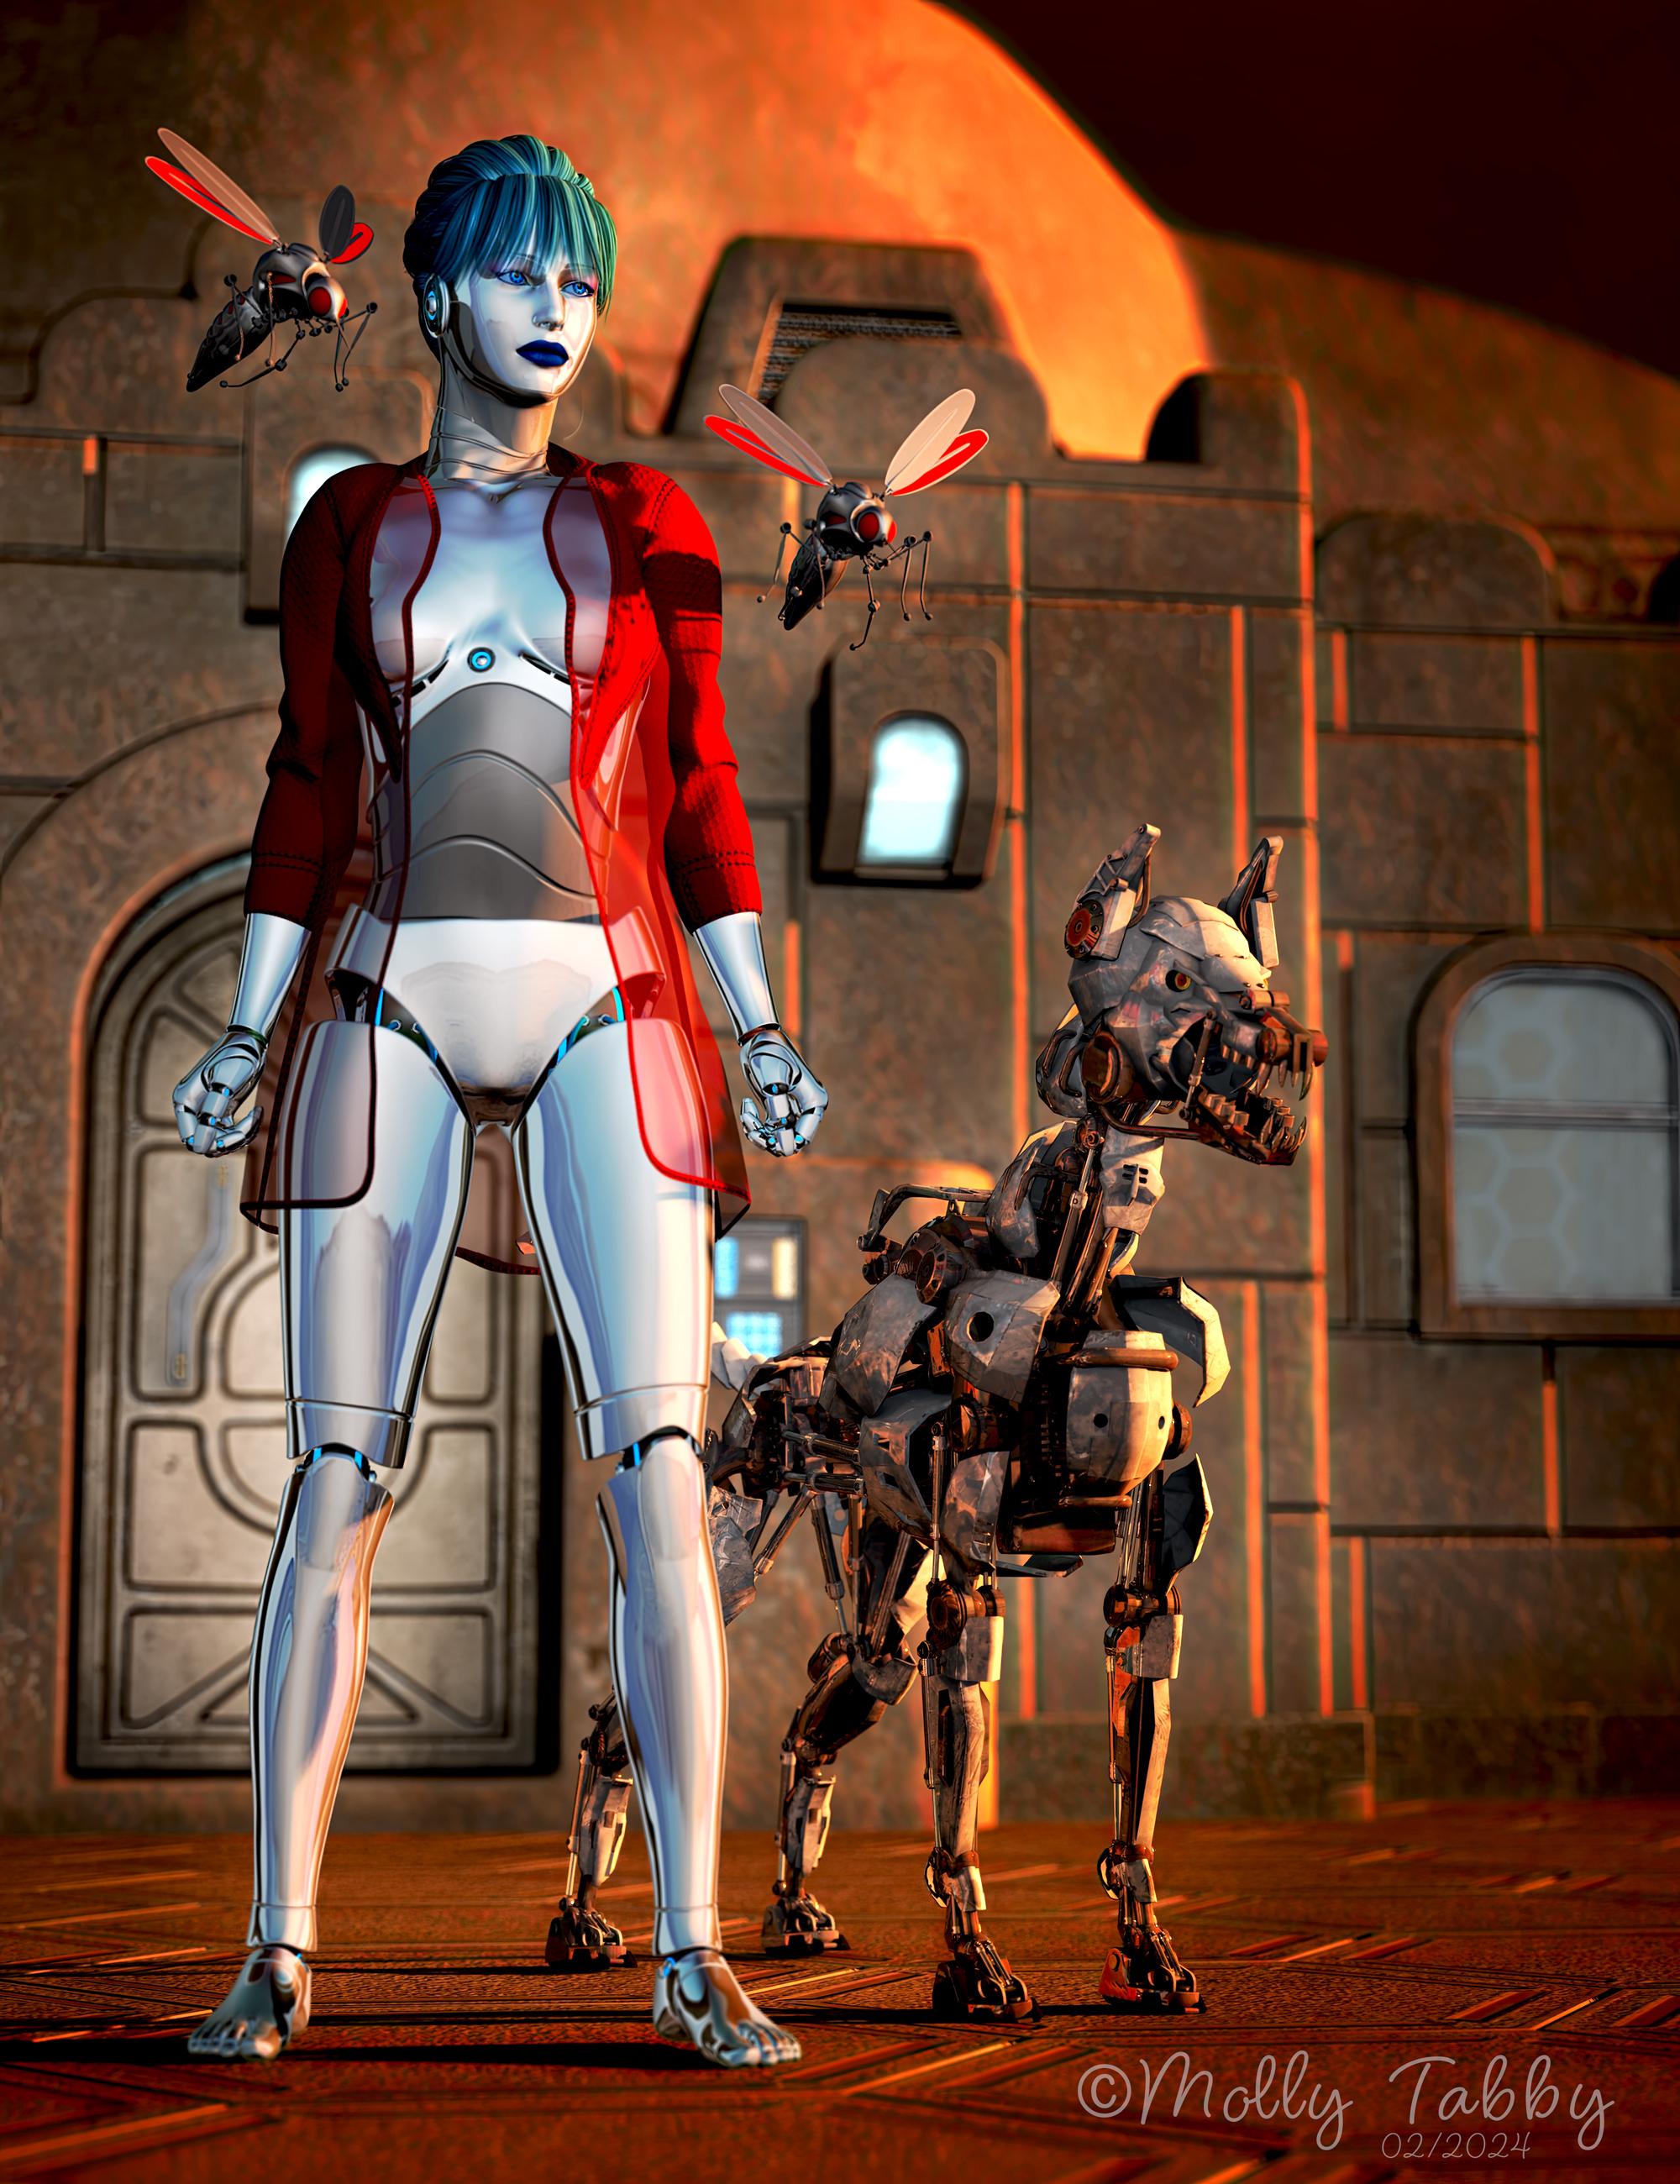 Image of a female robot with two cyber mosquitos and a cyber dog by her side.